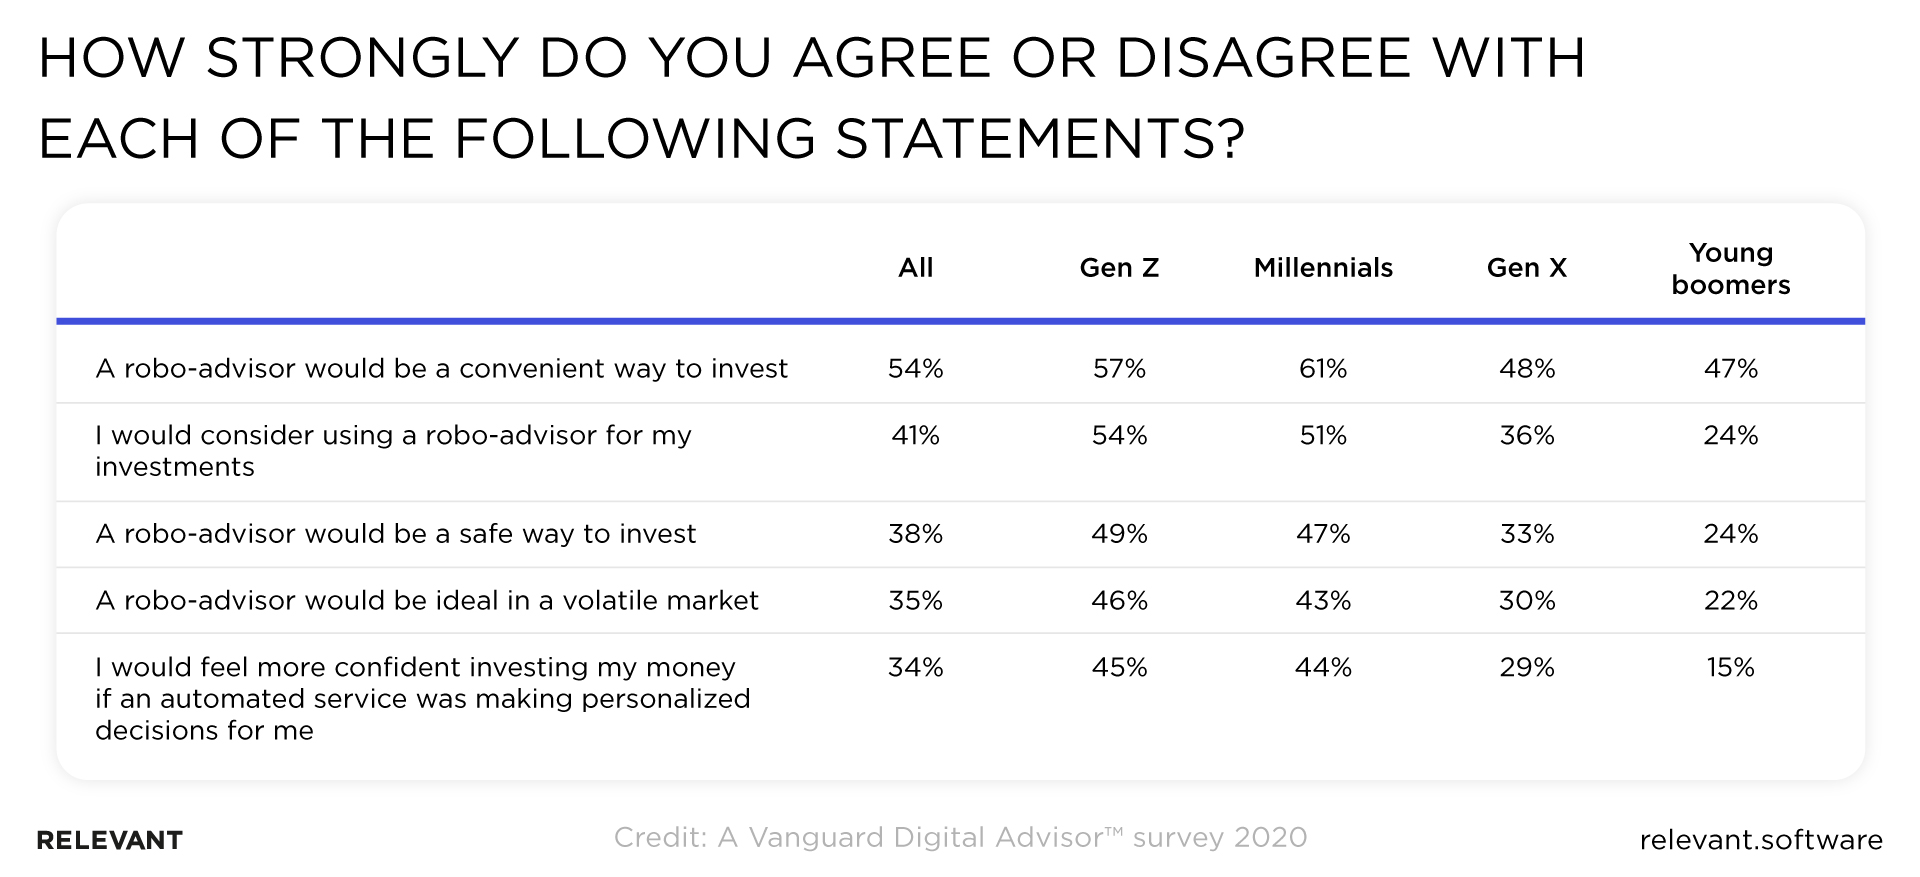 Millennials are twice as likely (51% vs 24%) to consider a robotic, i.e. AI-enabled financial advisor than previous generations.